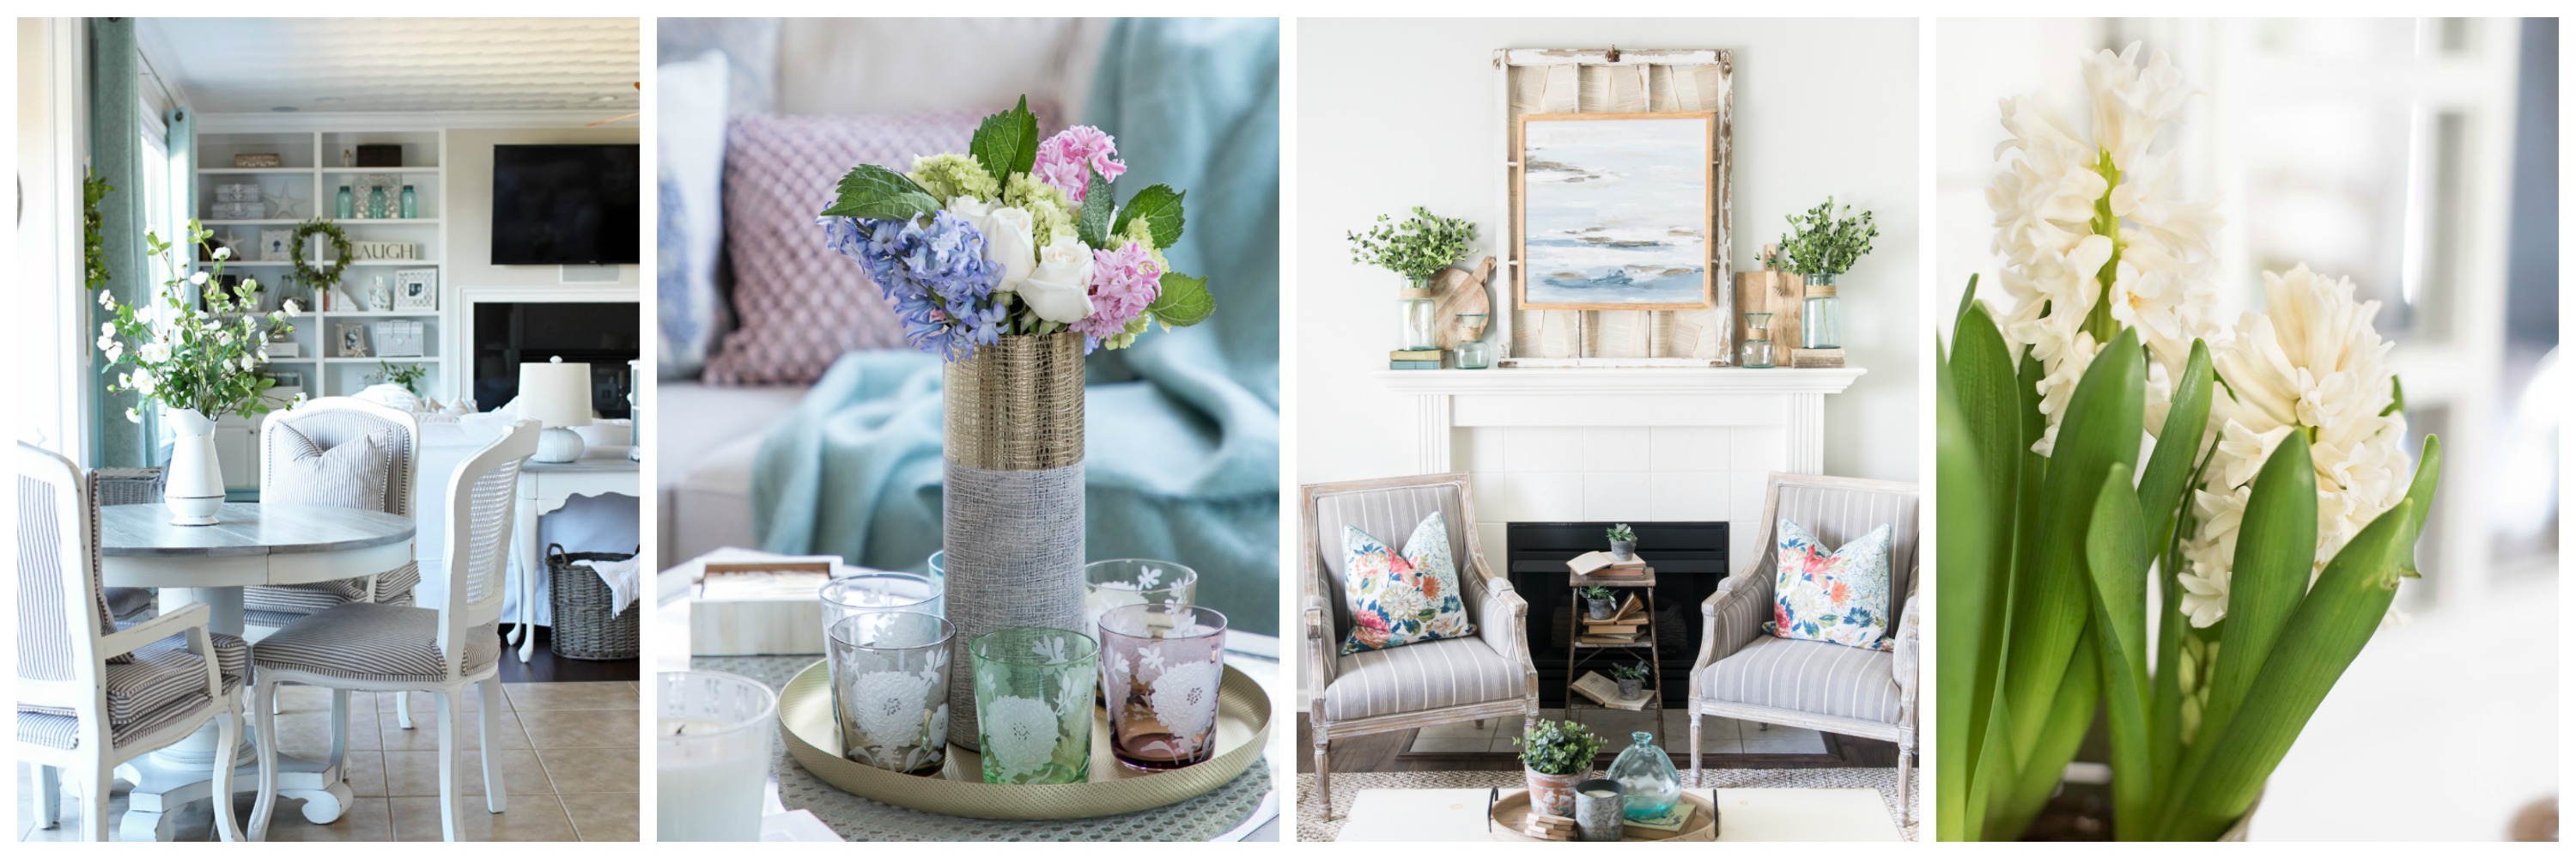 DIY home decor ideas - see 25+ STUNNING Spring Home Tours!